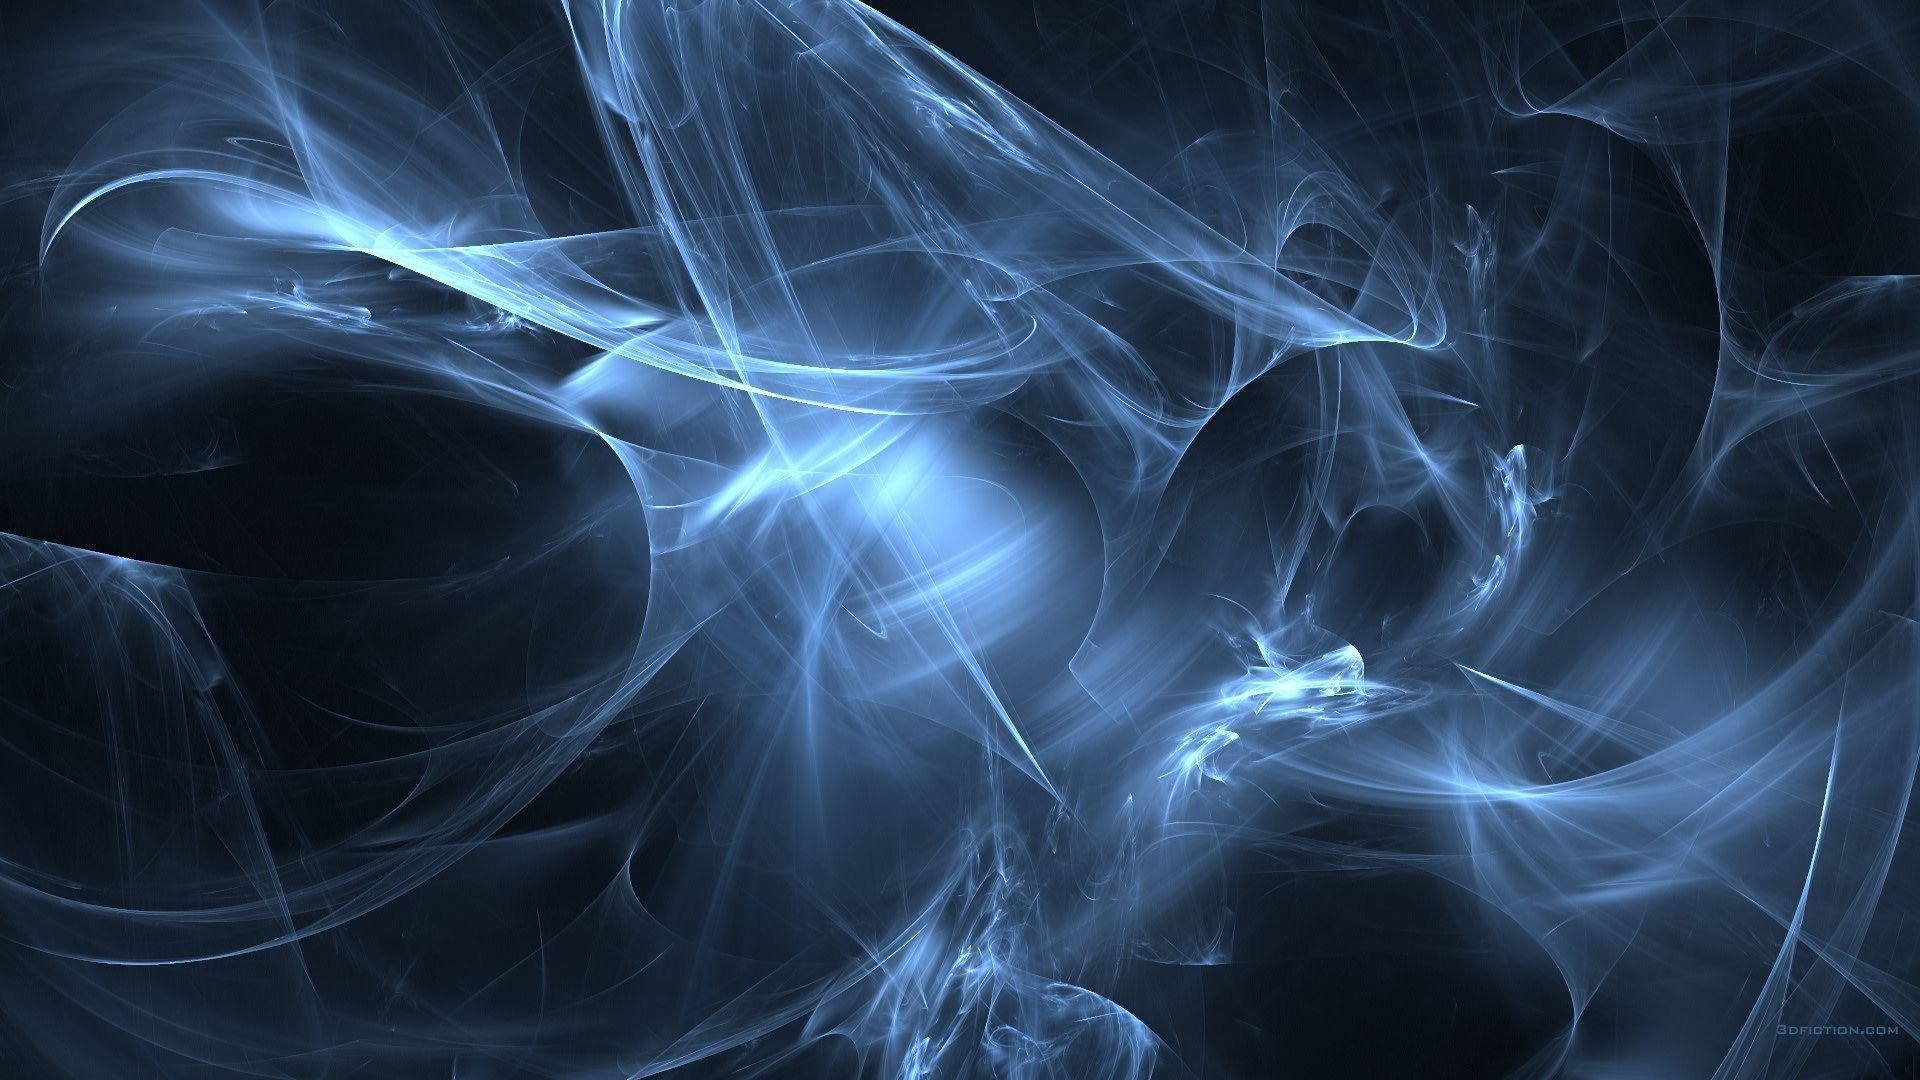 1920x1080 Moving Wallpapers, Blue Wallpapers, 3d Animation Wallpaper, Fractals, Iphone  Wallpaper,